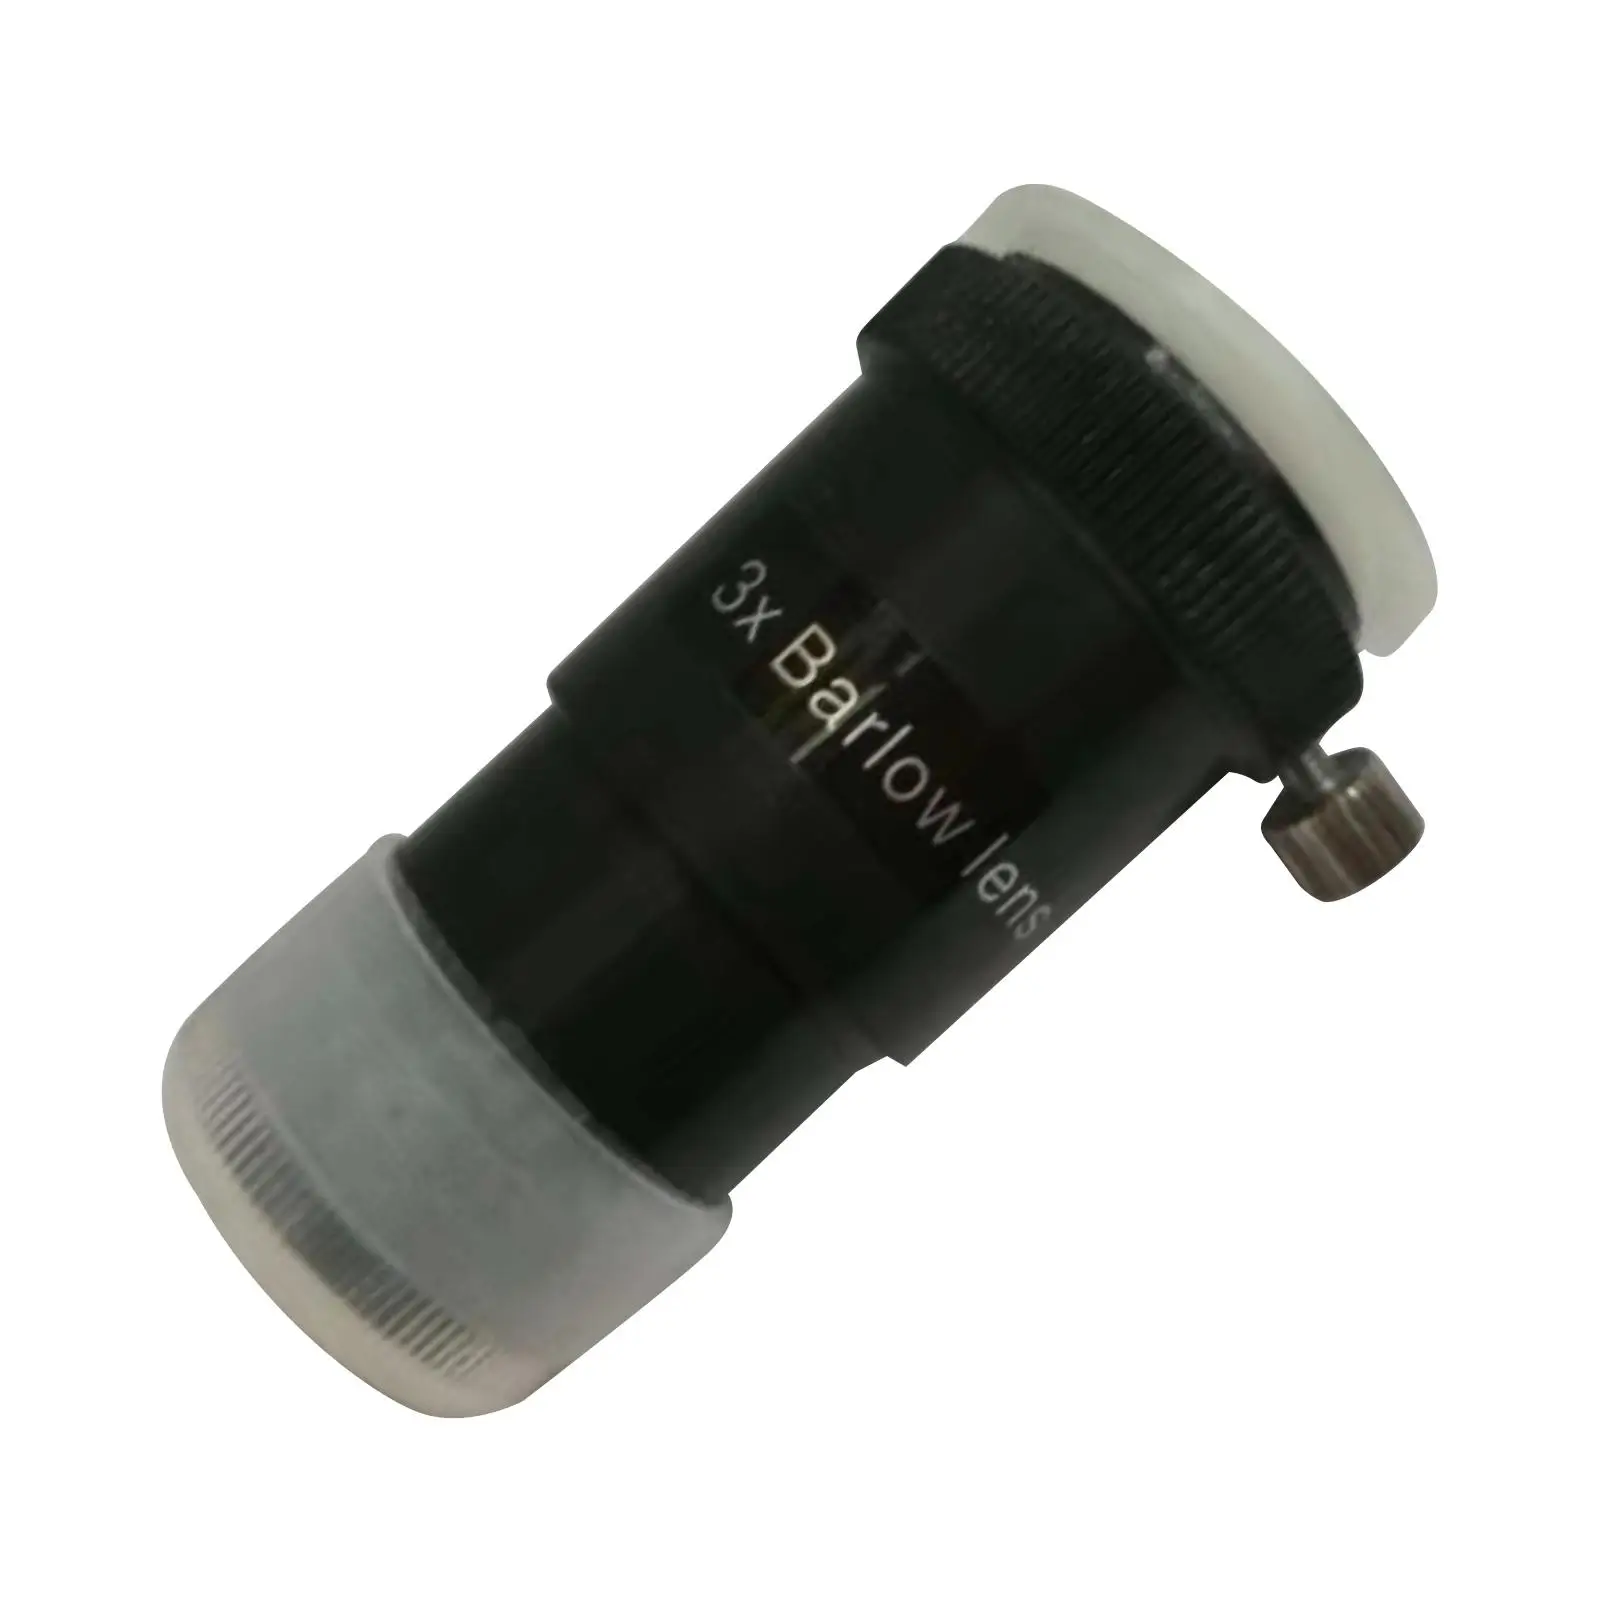 Telescope Eyepiece X Magnification 1.25inch Universal Multicoated